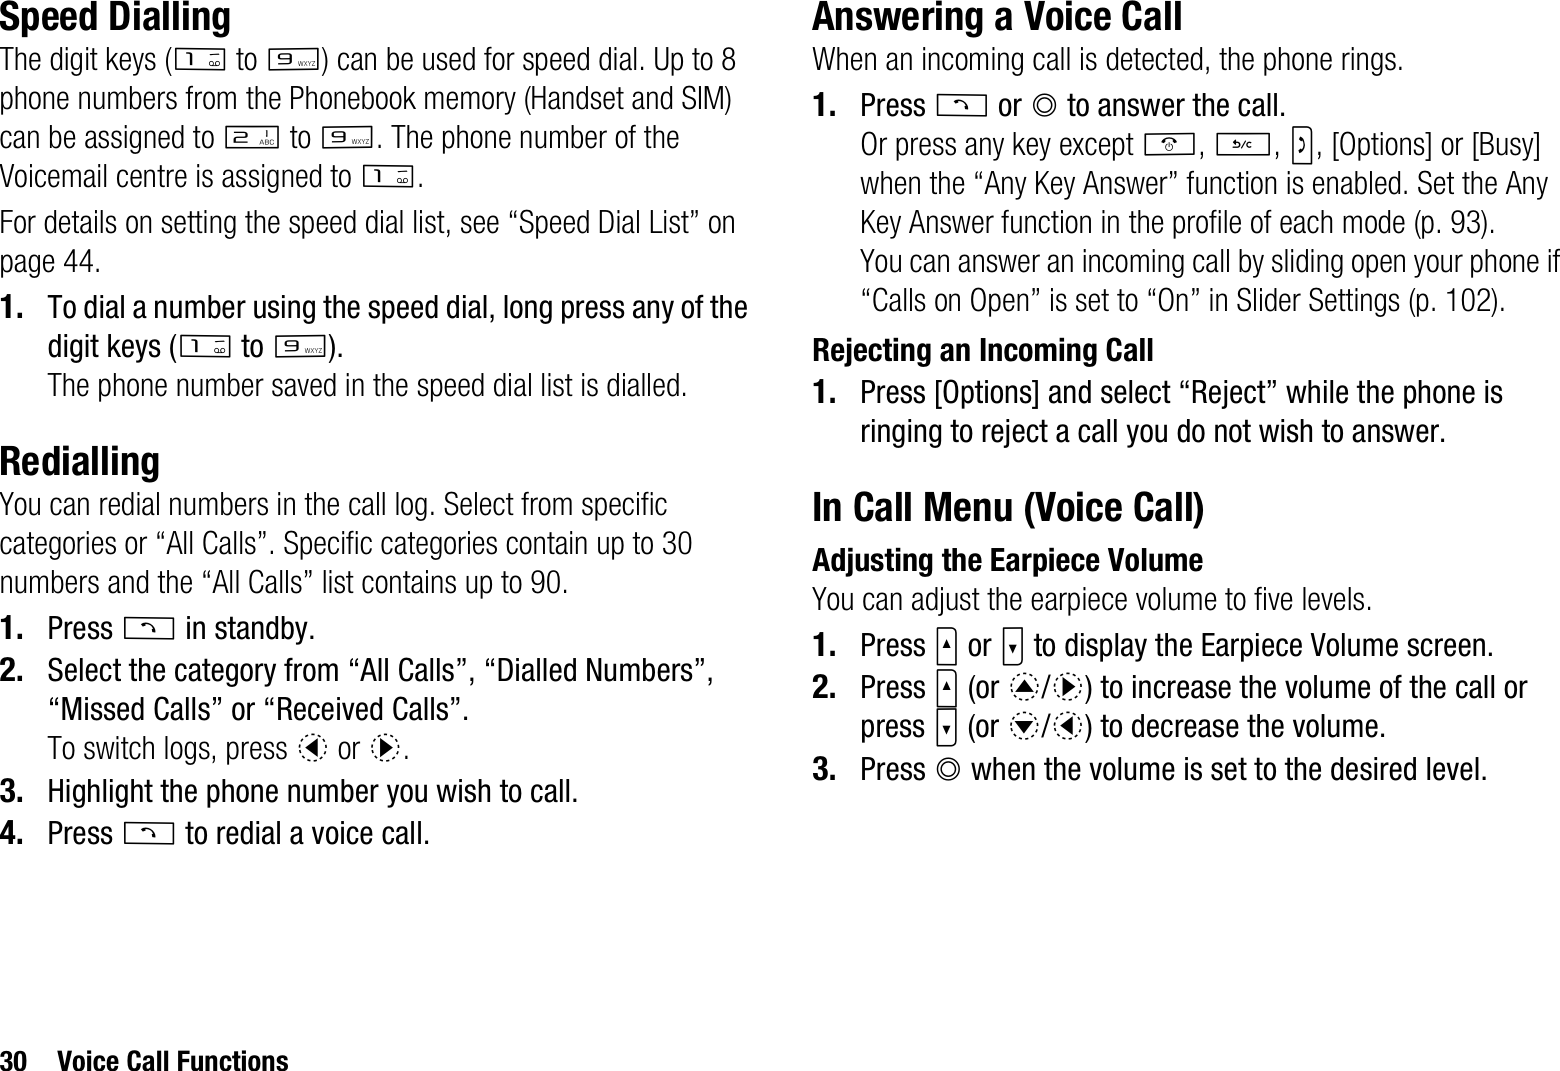 30 Voice Call FunctionsSpeed DiallingThe digit keys (G to O) can be used for speed dial. Up to 8 phone numbers from the Phonebook memory (Handset and SIM) can be assigned to H to O. The phone number of the Voicemail centre is assigned to G.For details on setting the speed dial list, see “Speed Dial List” on page 44.1. To dial a number using the speed dial, long press any of the digit keys (G to O).The phone number saved in the speed dial list is dialled.RediallingYou can redial numbers in the call log. Select from specific categories or “All Calls”. Specific categories contain up to 30 numbers and the “All Calls” list contains up to 90.1. Press D in standby.2. Select the category from “All Calls”, “Dialled Numbers”, “Missed Calls” or “Received Calls”.To switch logs, press c or d.3. Highlight the phone number you wish to call.4. Press D to redial a voice call.Answering a Voice CallWhen an incoming call is detected, the phone rings.1. Press D or B to answer the call.Or press any key except F,U,S, [Options] or [Busy] when the “Any Key Answer” function is enabled. Set the Any Key Answer function in the profile of each mode (p. 93).You can answer an incoming call by sliding open your phone if “Calls on Open” is set to “On” in Slider Settings (p. 102).Rejecting an Incoming Call1. Press [Options] and select “Reject” while the phone is ringing to reject a call you do not wish to answer.In Call Menu (Voice Call)Adjusting the Earpiece VolumeYou can adjust the earpiece volume to five levels.1. Press V or W to display the Earpiece Volume screen.2. Press V (or a/d) to increase the volume of the call or press W (or b/c) to decrease the volume.3. Press B when the volume is set to the desired level.